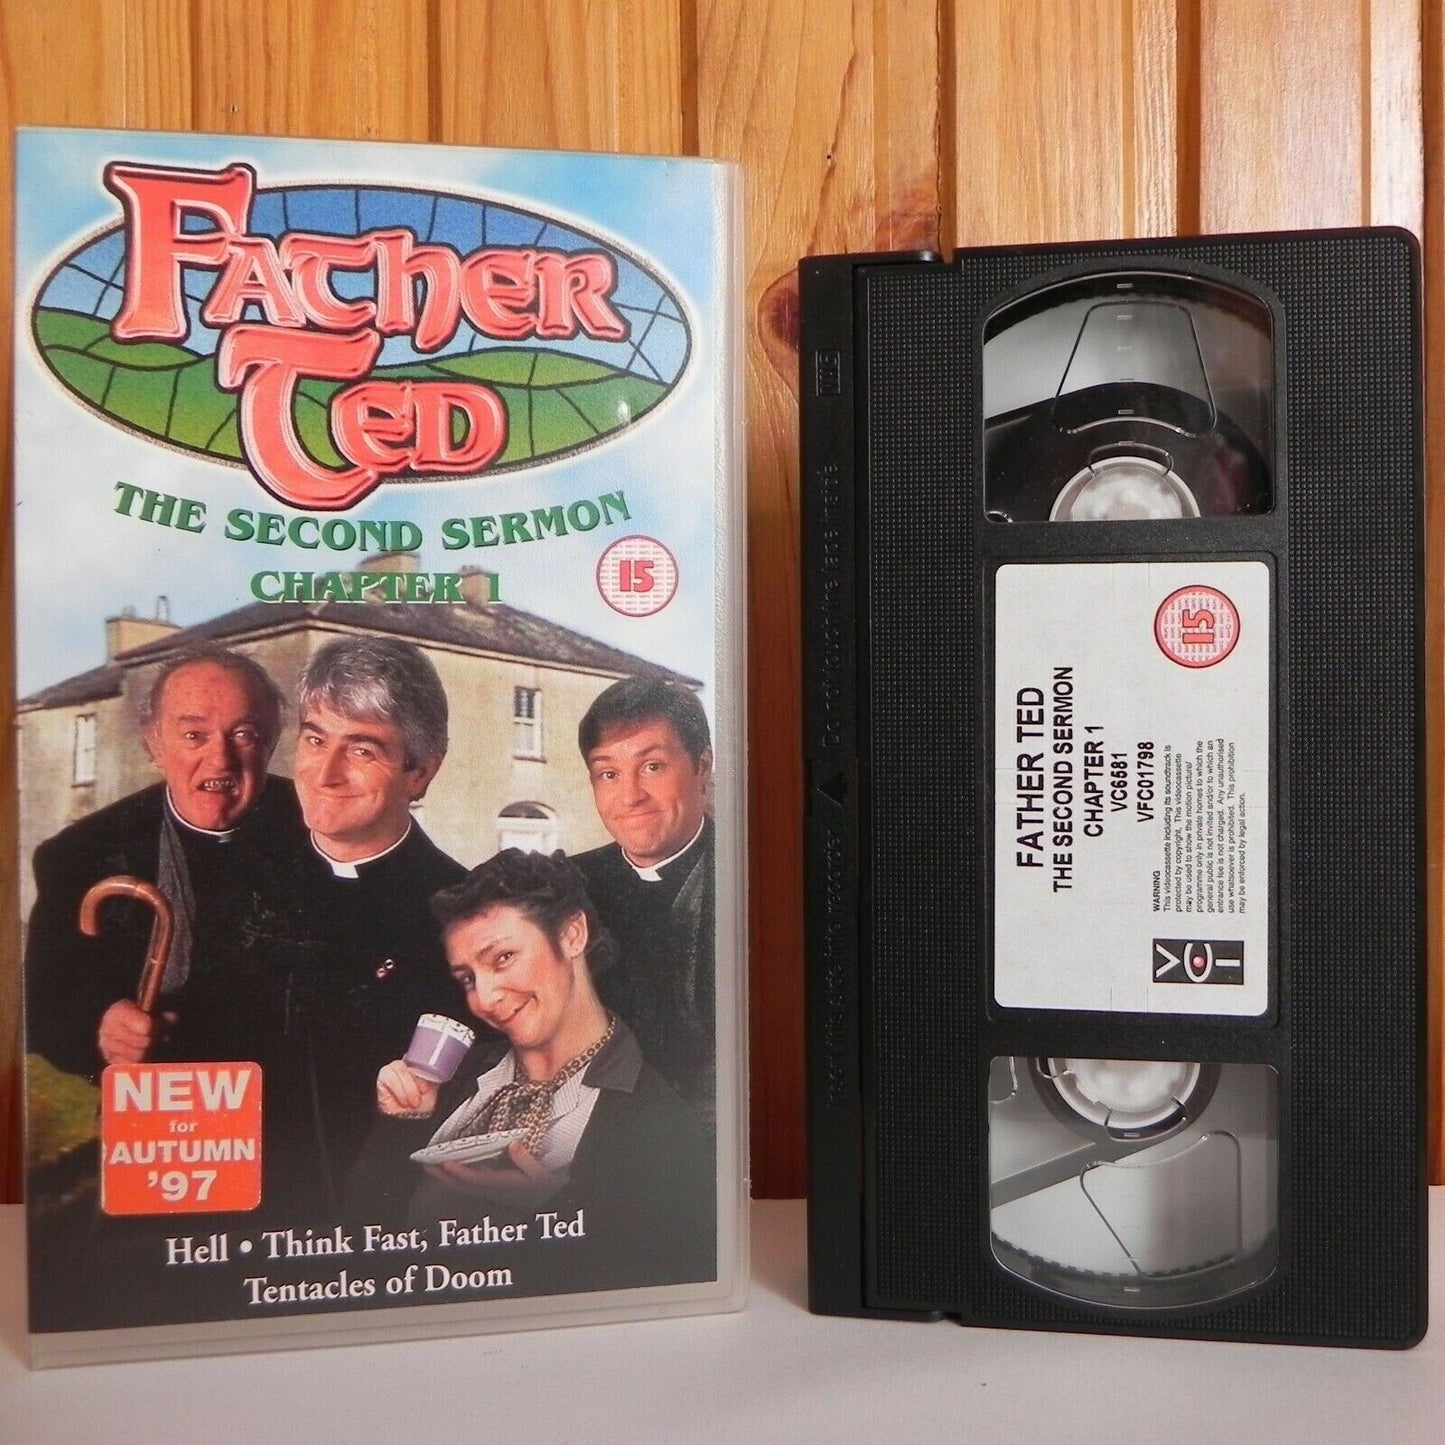 Father Ted: The Second Sermon - Chaper 1 - VCI - TV Show - Episodes 1-3 - VHS-